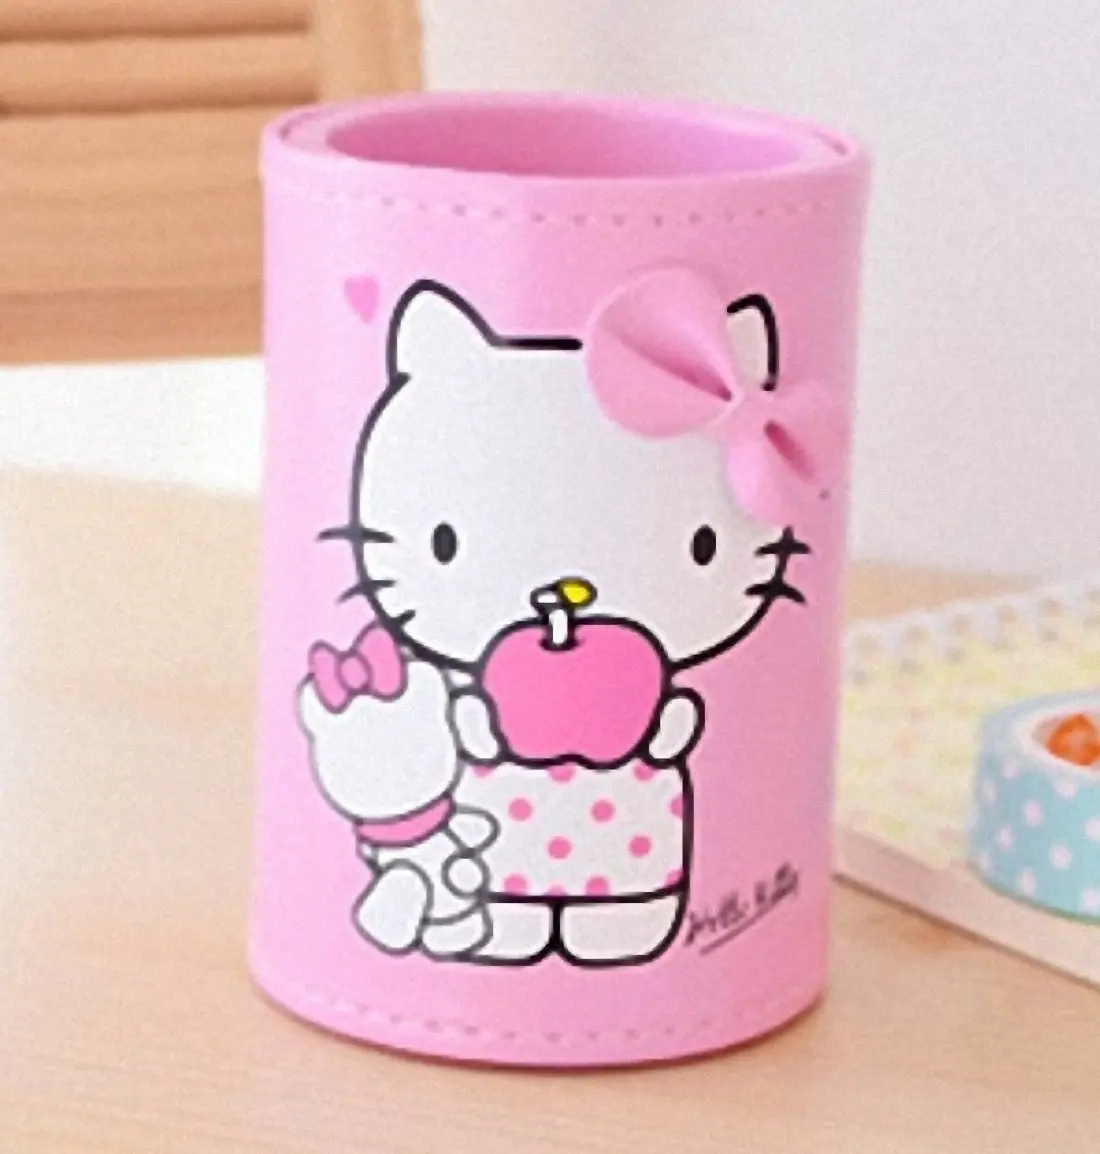 Buy Pink Hello Kitty Pu Leather Pen Holder Pen Container Cute